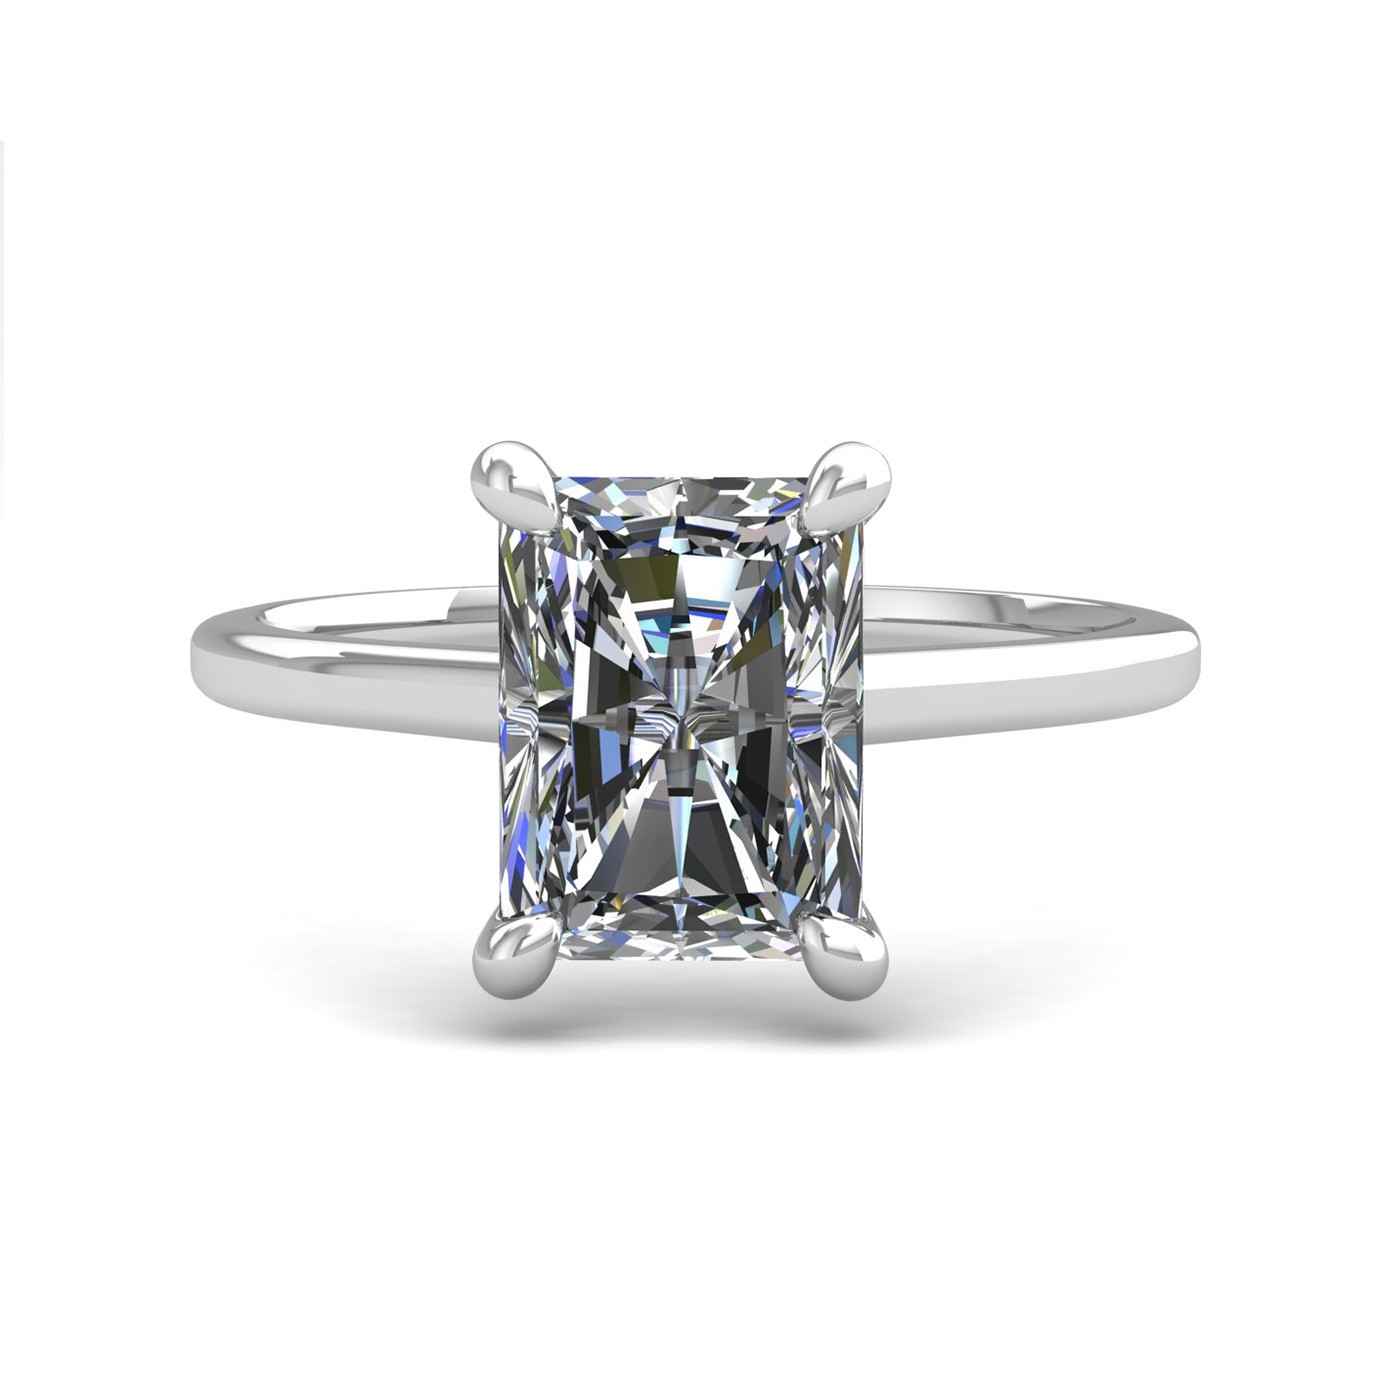 18k white gold  2,00 ct 4 prongs solitaire radiant cut diamond engagement ring with whisper thin band